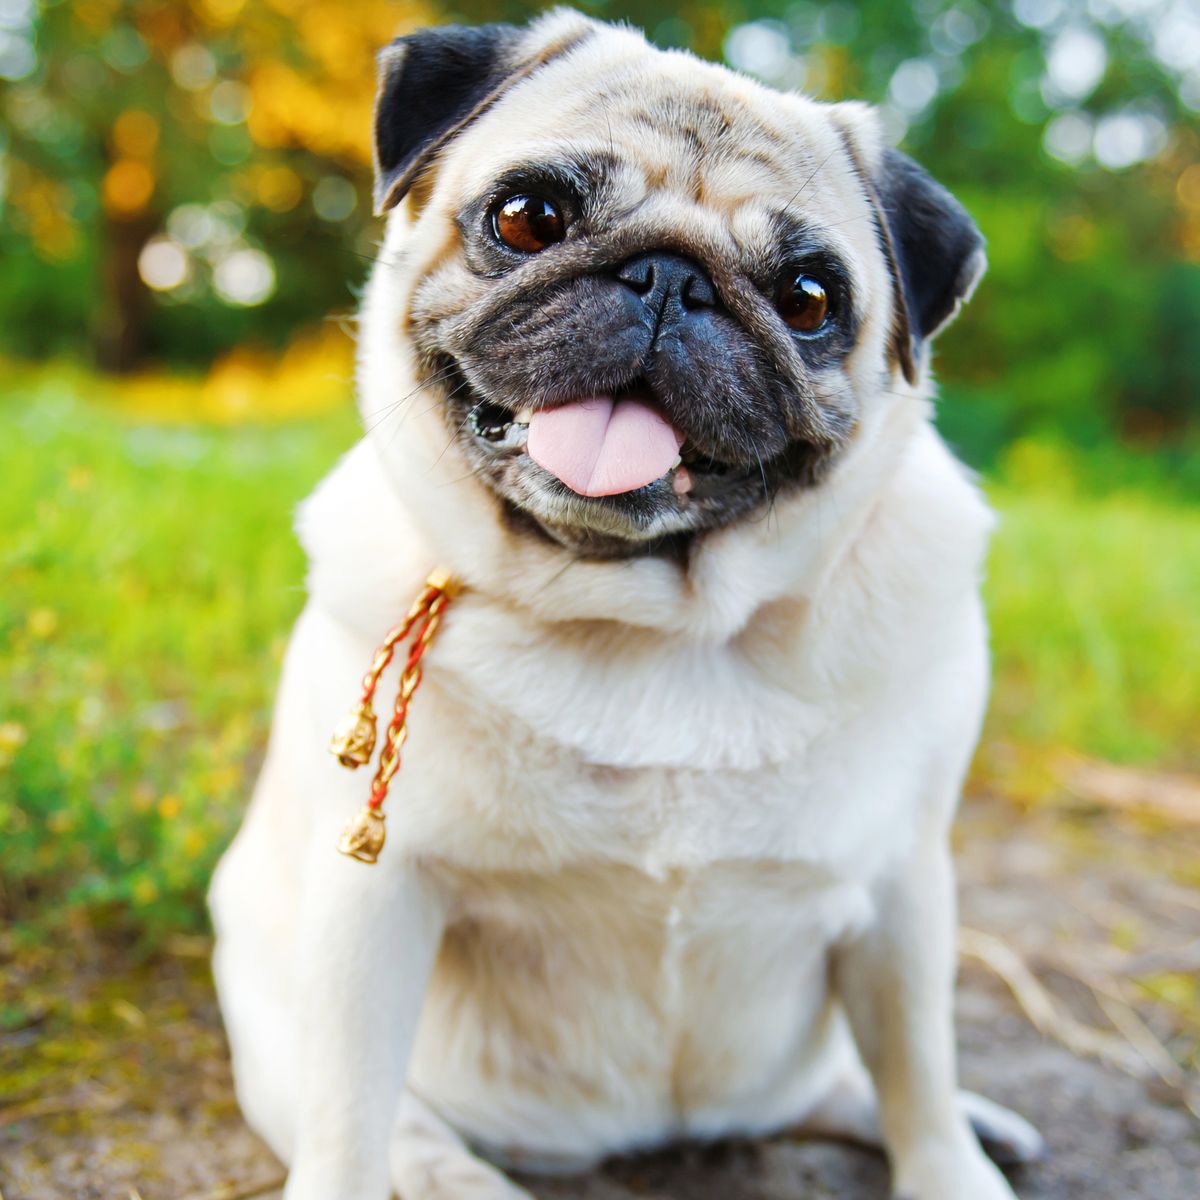 Pugs no longer deemed 'typical' dog breed due to inherent health issues -  9Honey